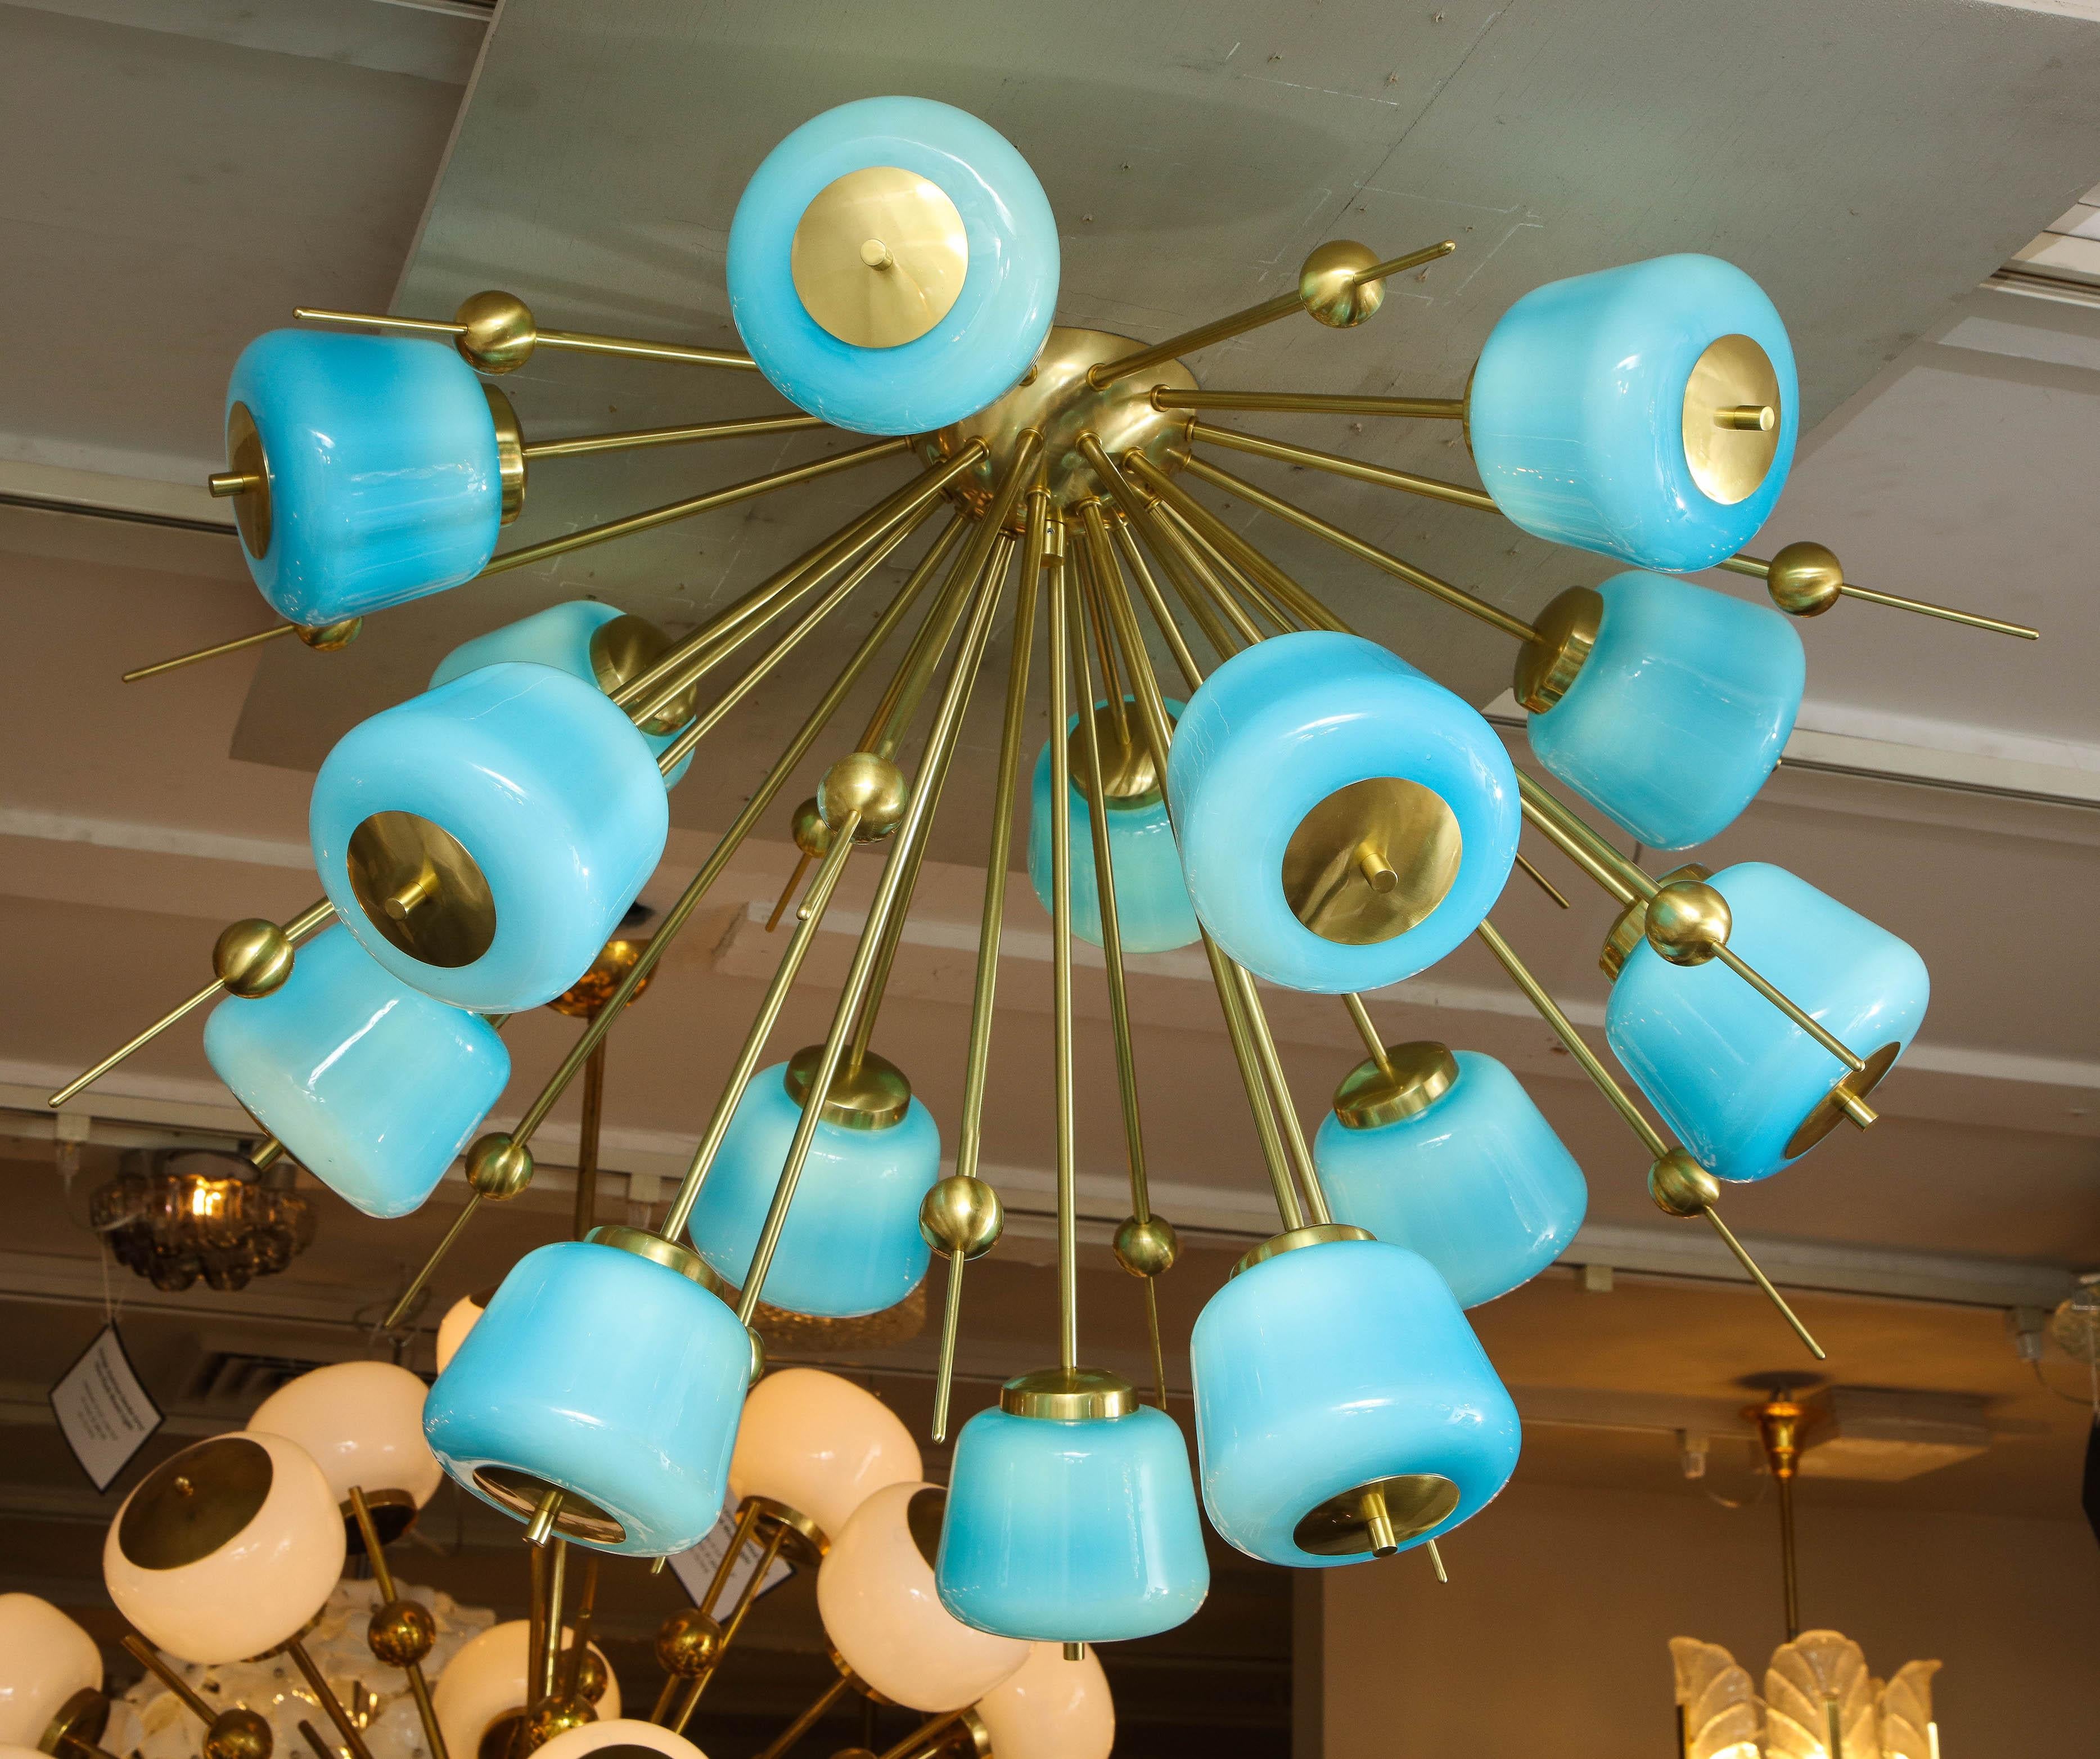 Custom turquoise milk glass flush mount chandelier in polished brass. Customization is available in different sizes, glass colors (white, sanded clear and turquoise) and finishes. G9 base light sockets are used for this chandelier. Please specify